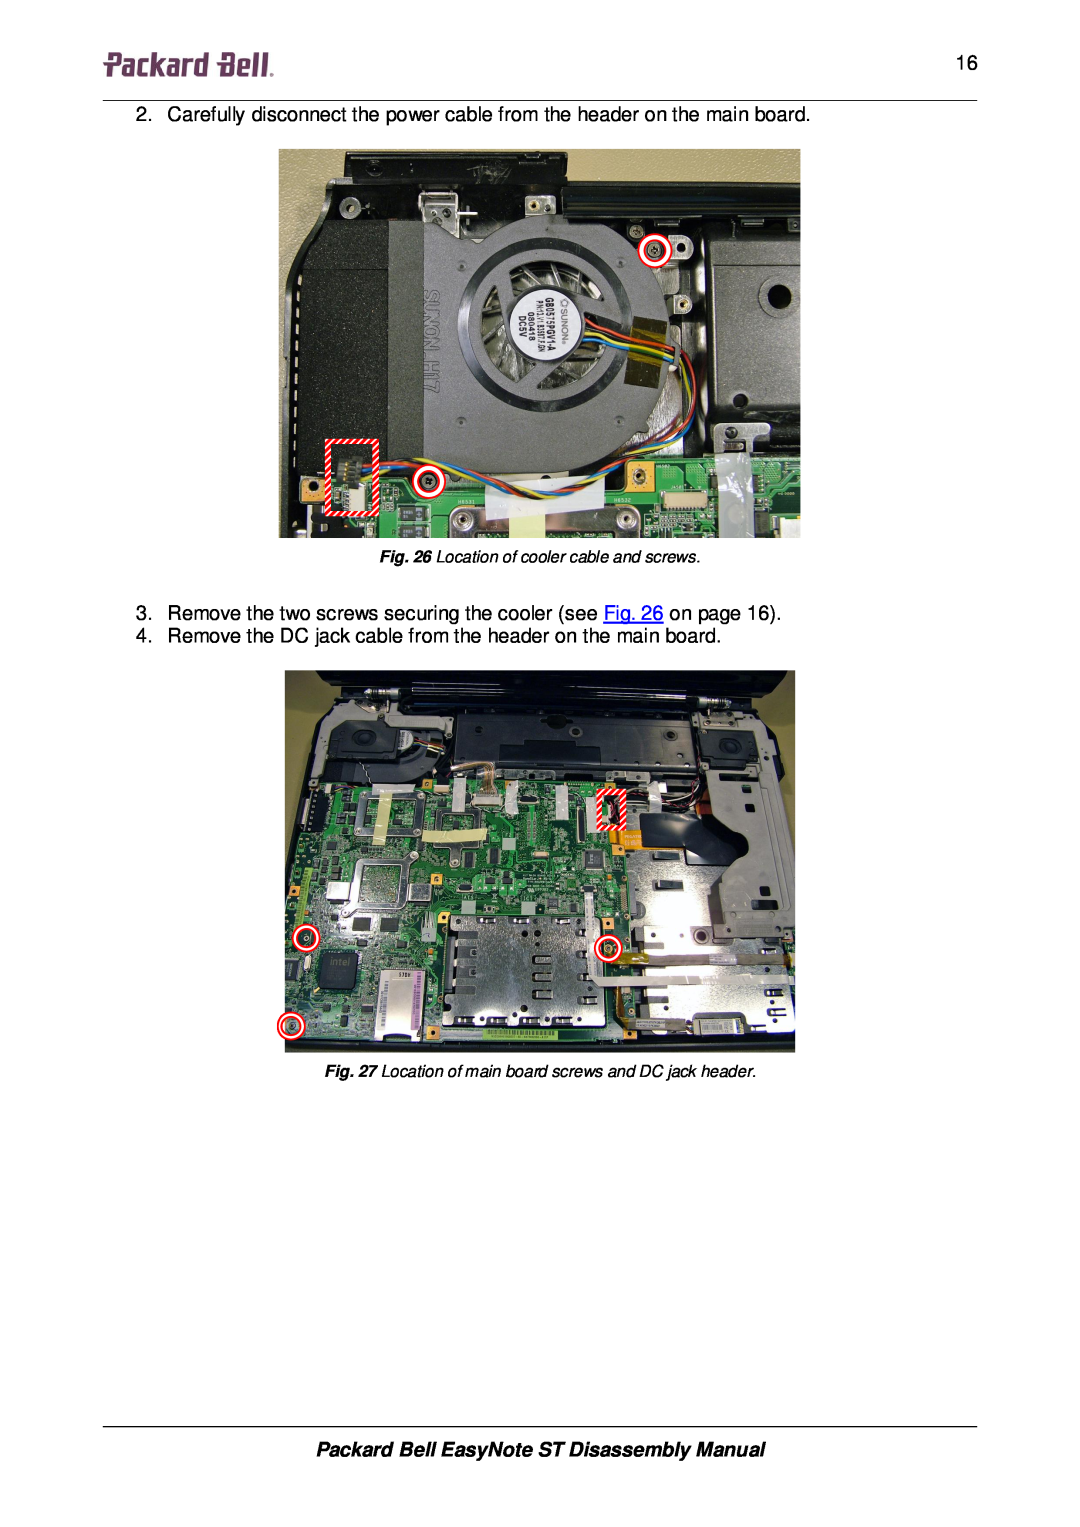 Packard Bell ST 1616161616, Remove the two screws securing the cooler see on page, Location of cooler cable and screws 